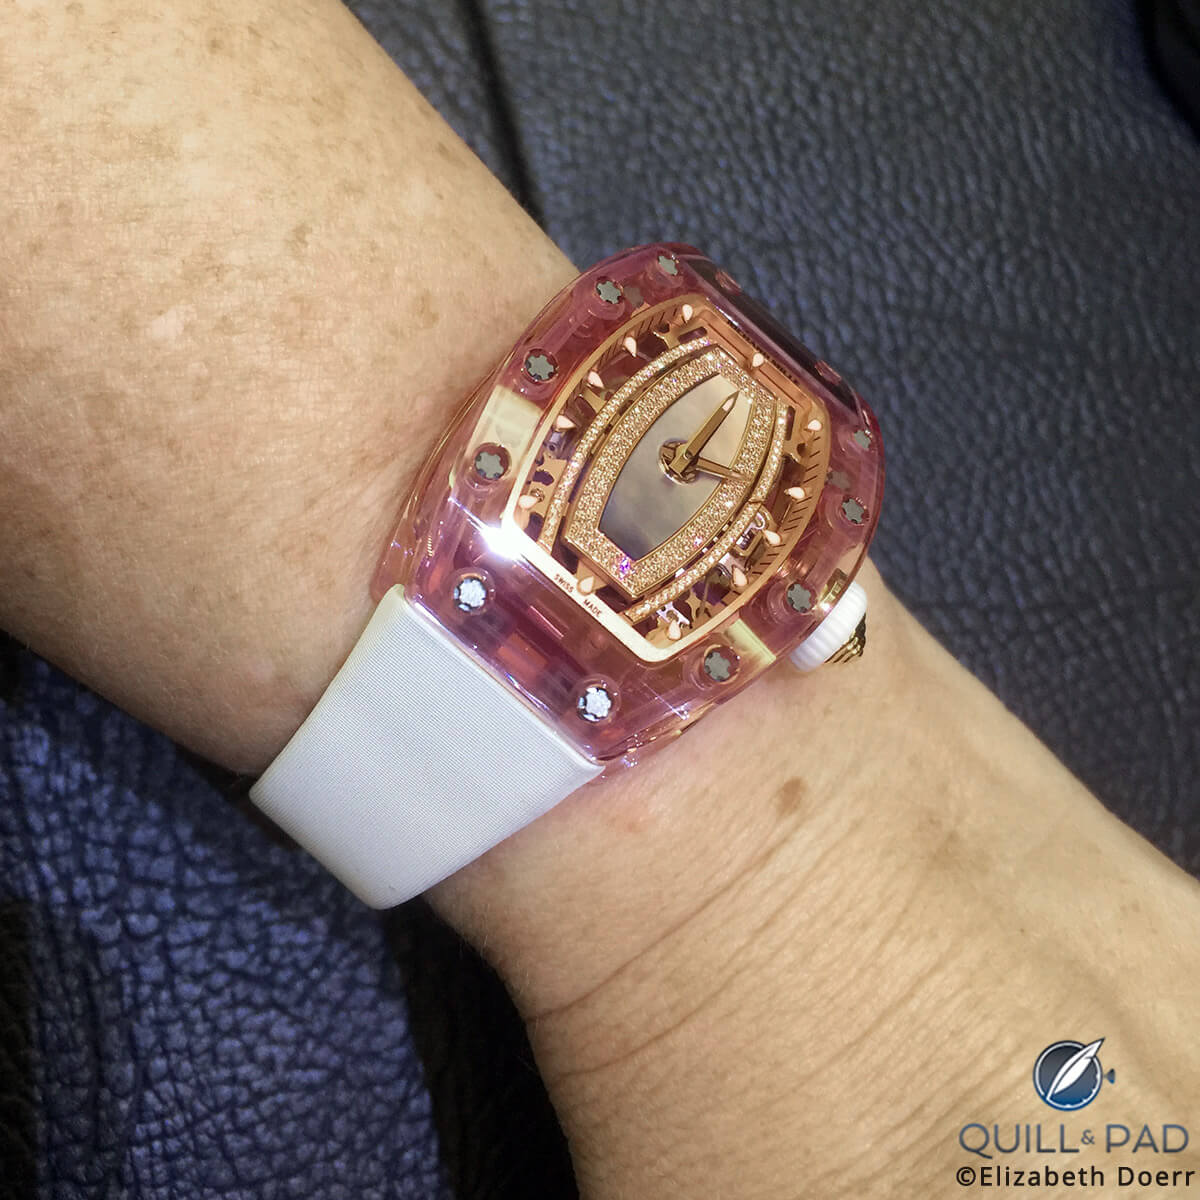 The Richard Mille RM 07-02 Pink Lady Sapphire fits comfortably on the wrist